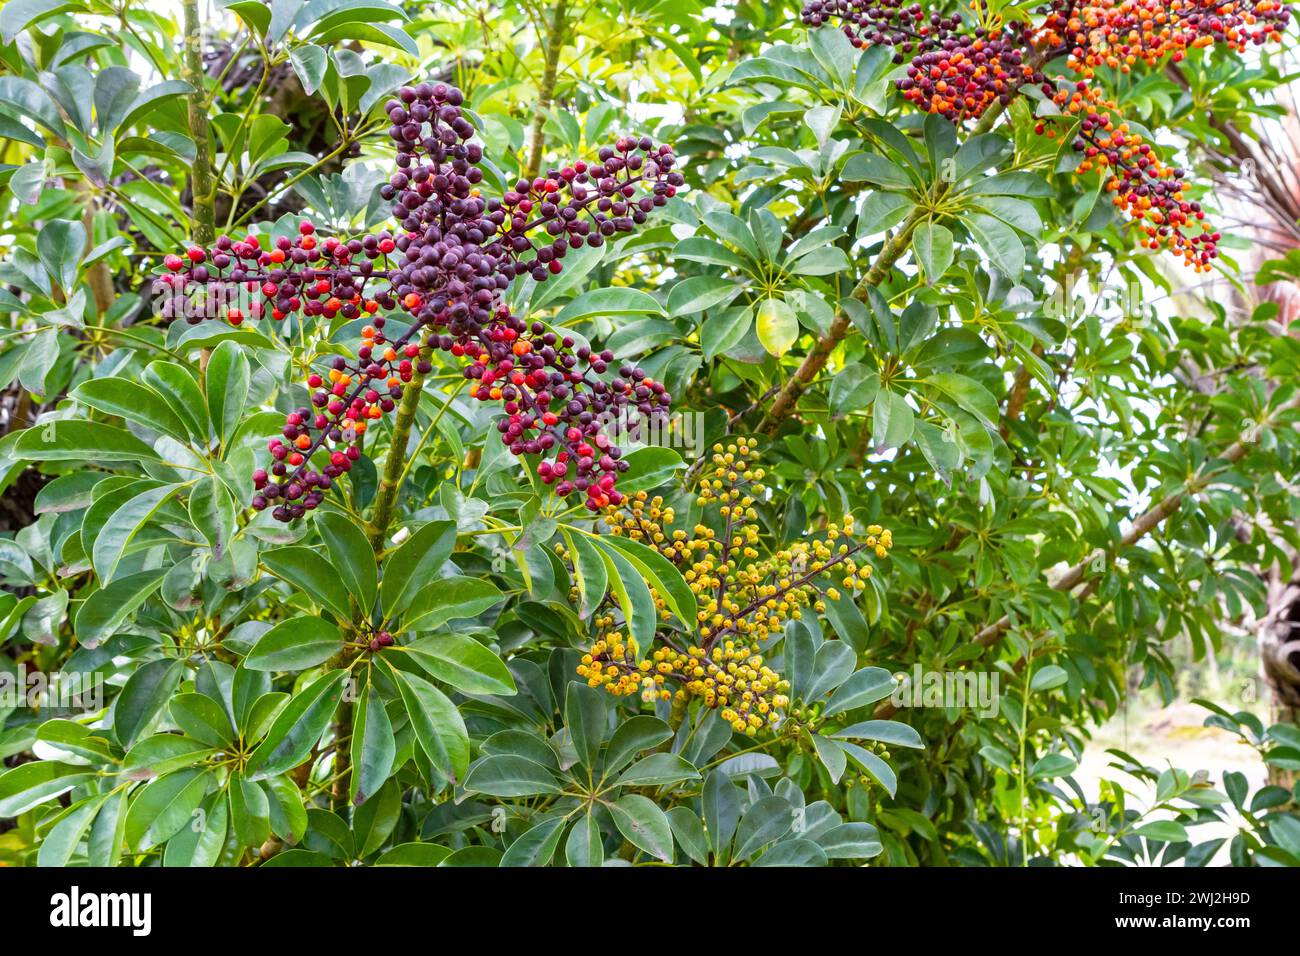 A Dwarf Umbrella tree (Heptapleurum arboricola) with fruit (drupes) in various stages of ripeness, growing on the Big Island, Hawaii. Stock Photo